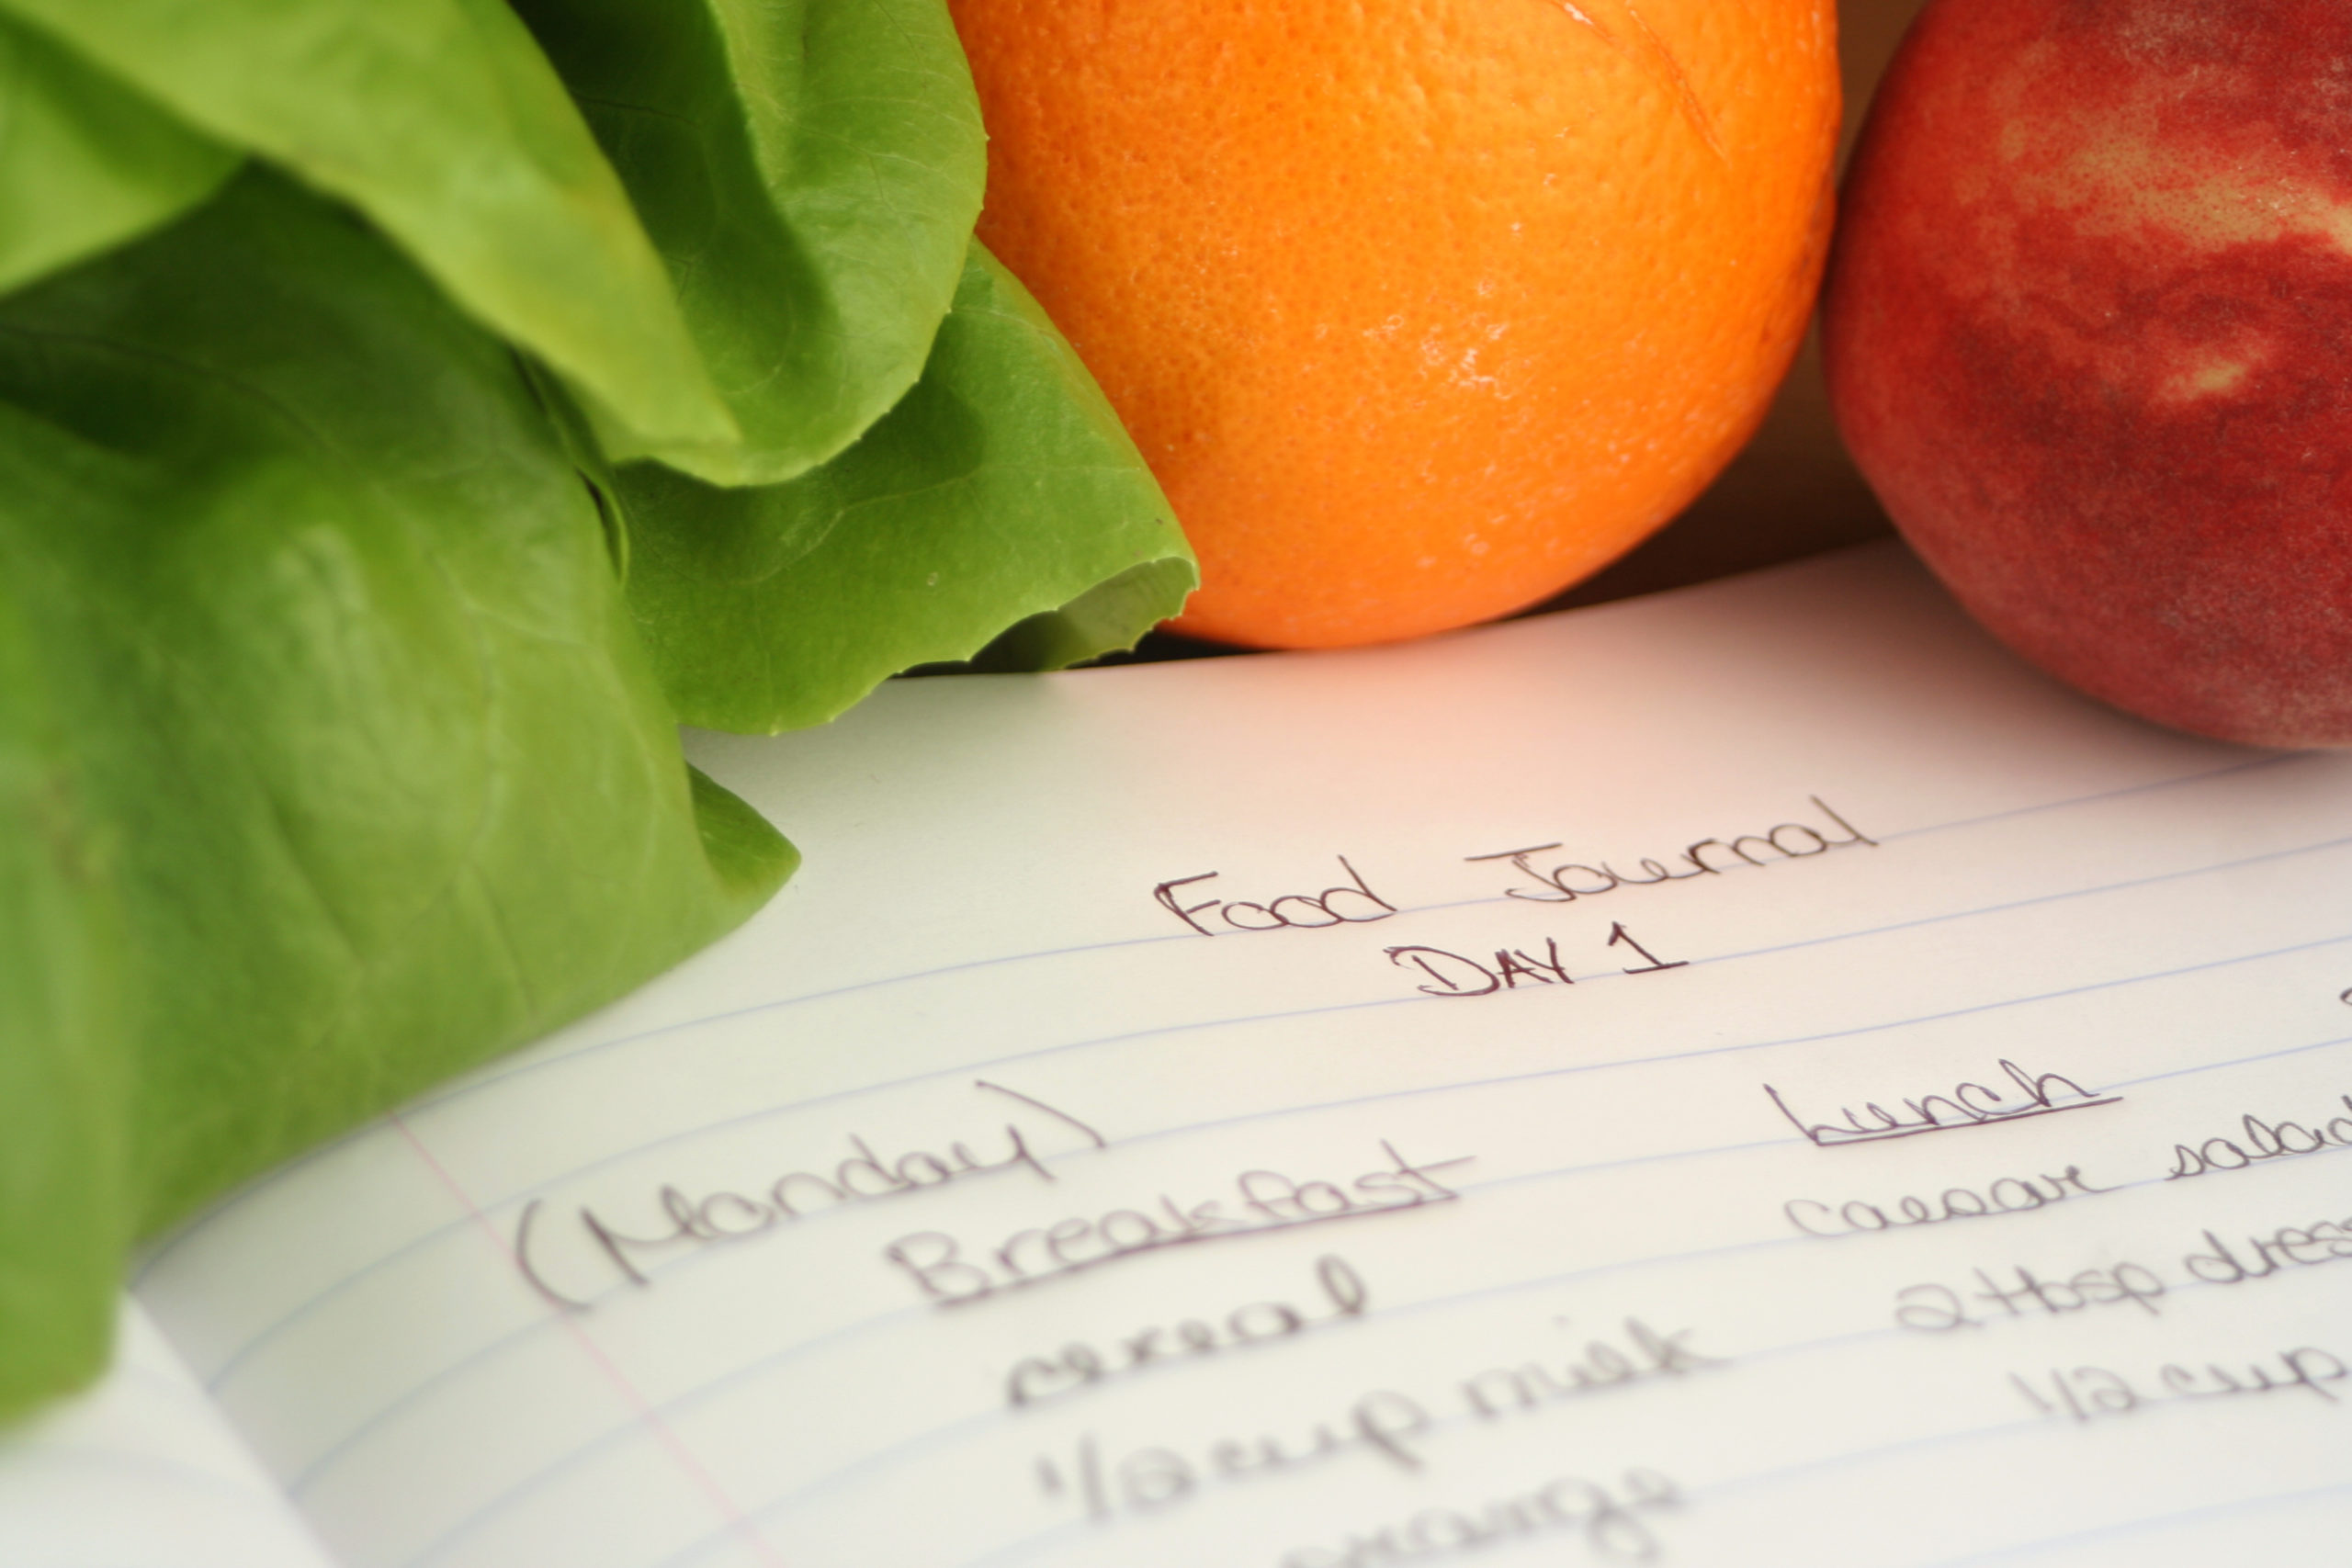 Food Journal for Gastric Surgery Preparation